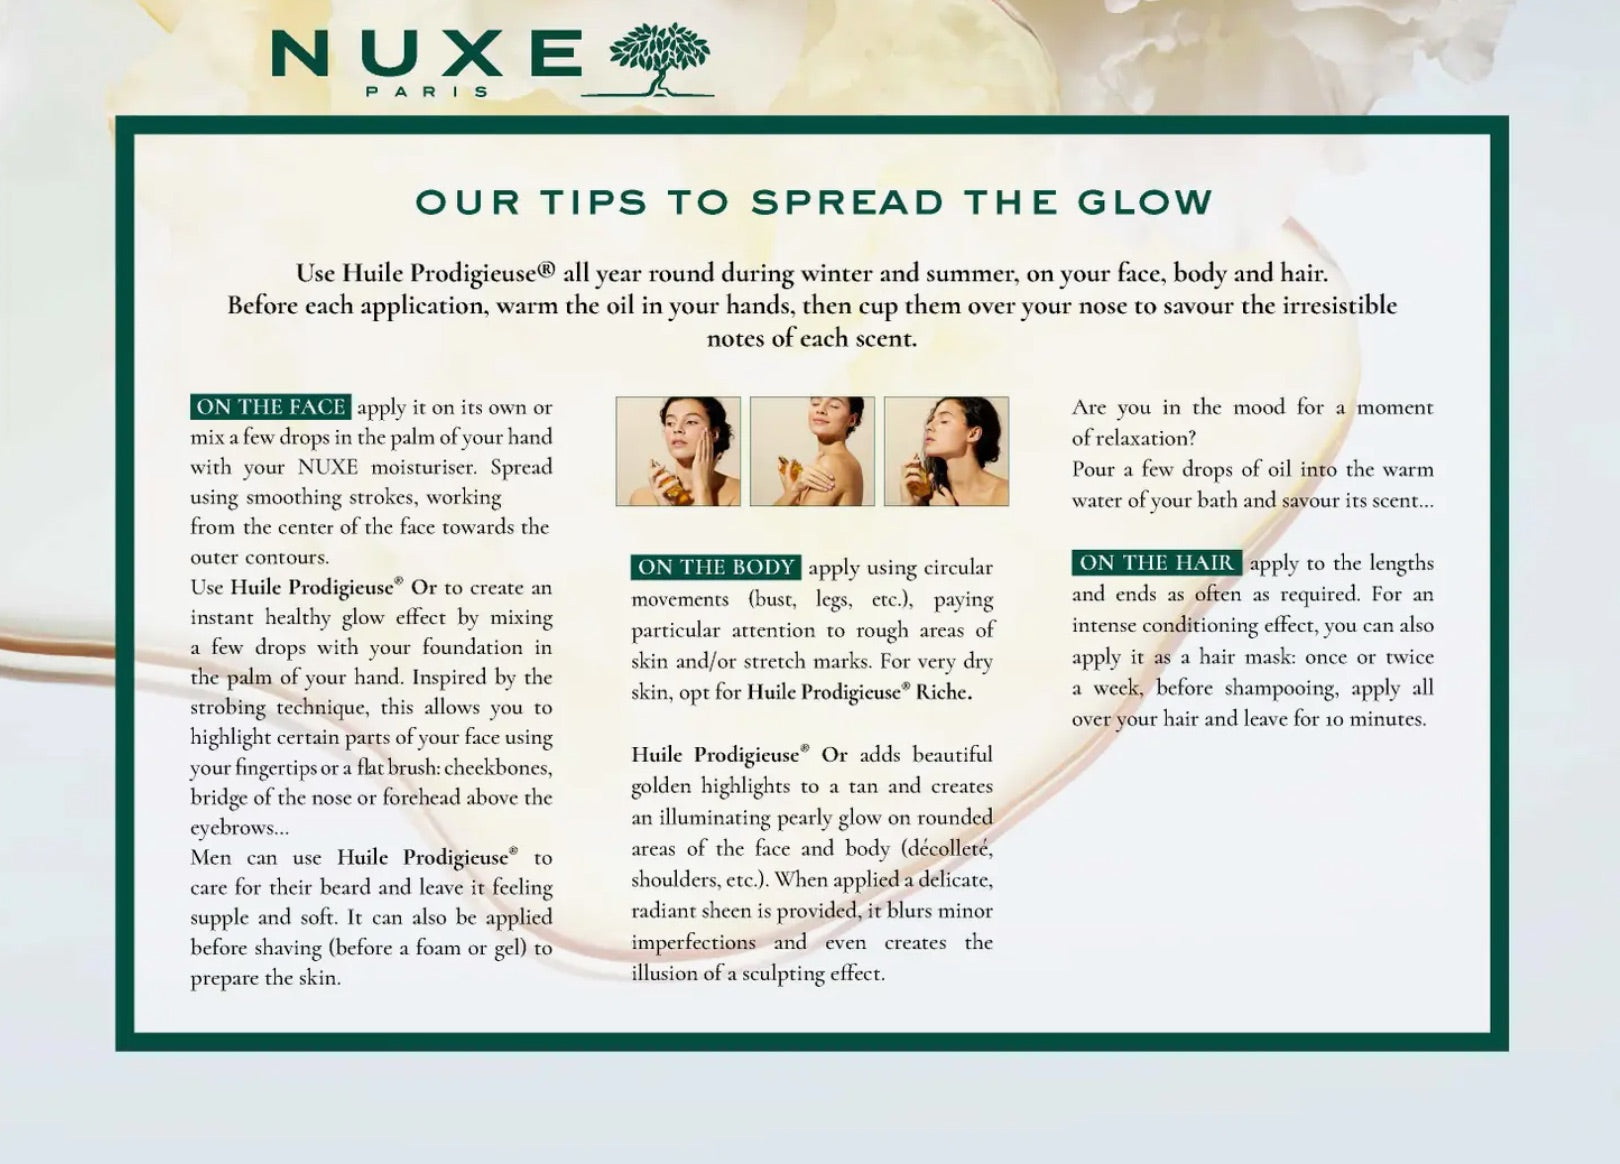 Our Tips to Apread the Glow